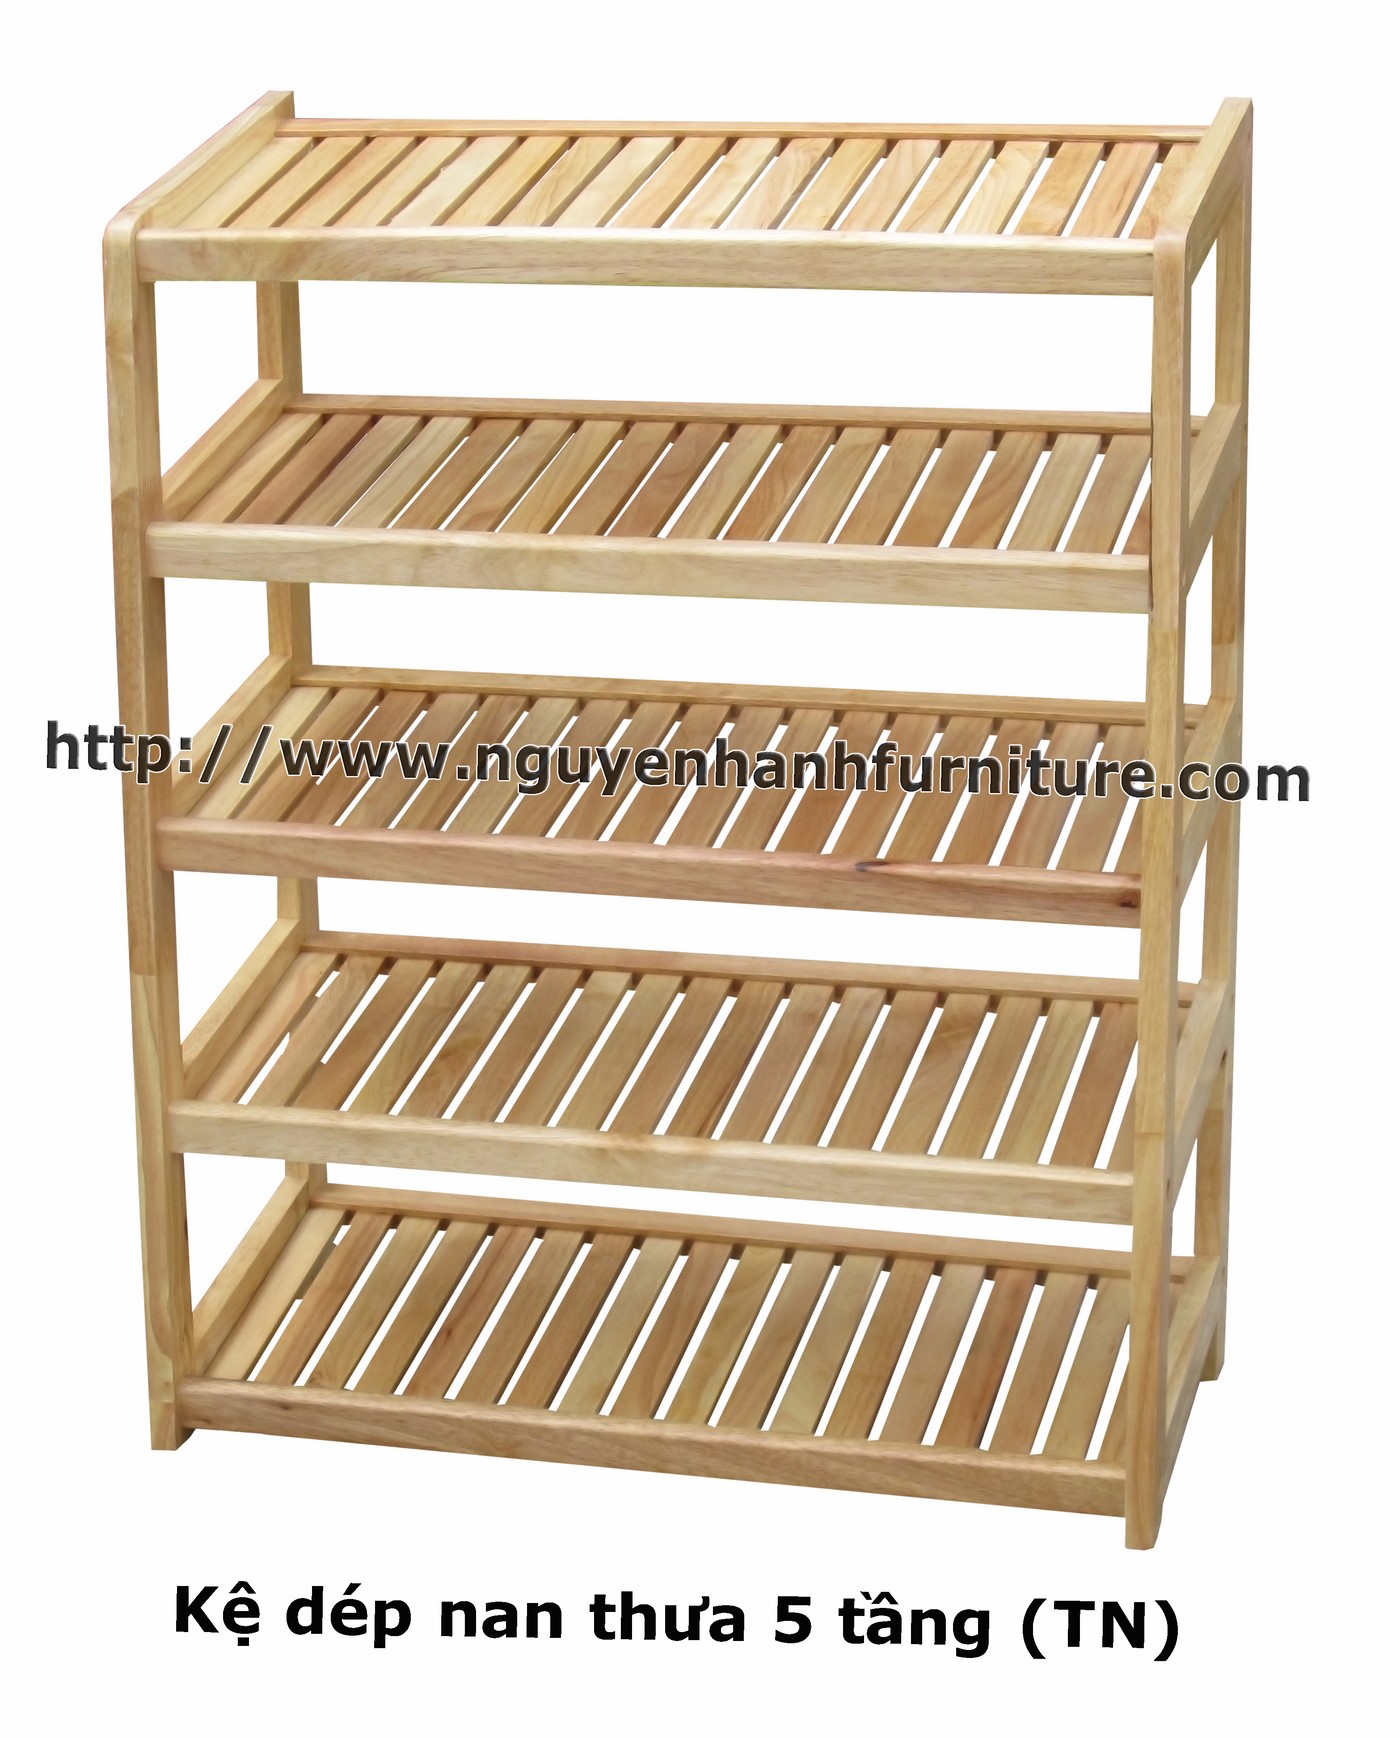 Name product: Shoeshelf 5 Floors with sparse blades (Natural) - Dimensions: 62 x 30 x 82 (H) - Description: Wood natural rubbe